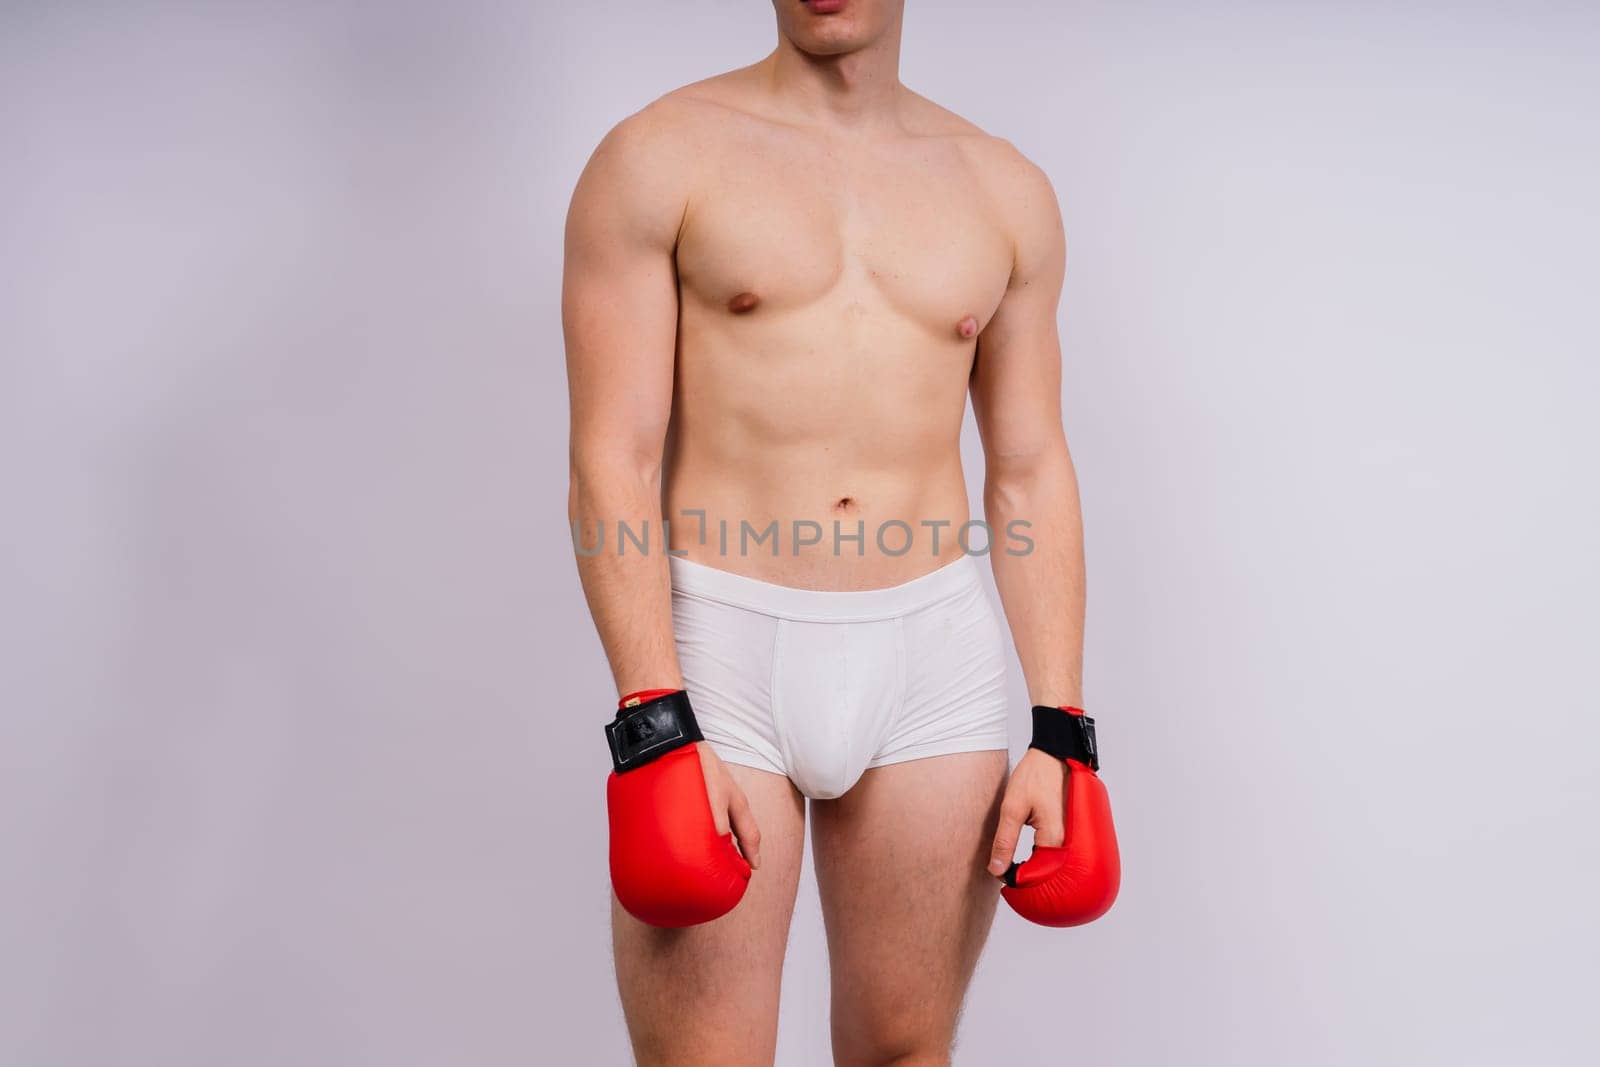 Bodybuilders boxing gloves on a white background and white pants athlete model